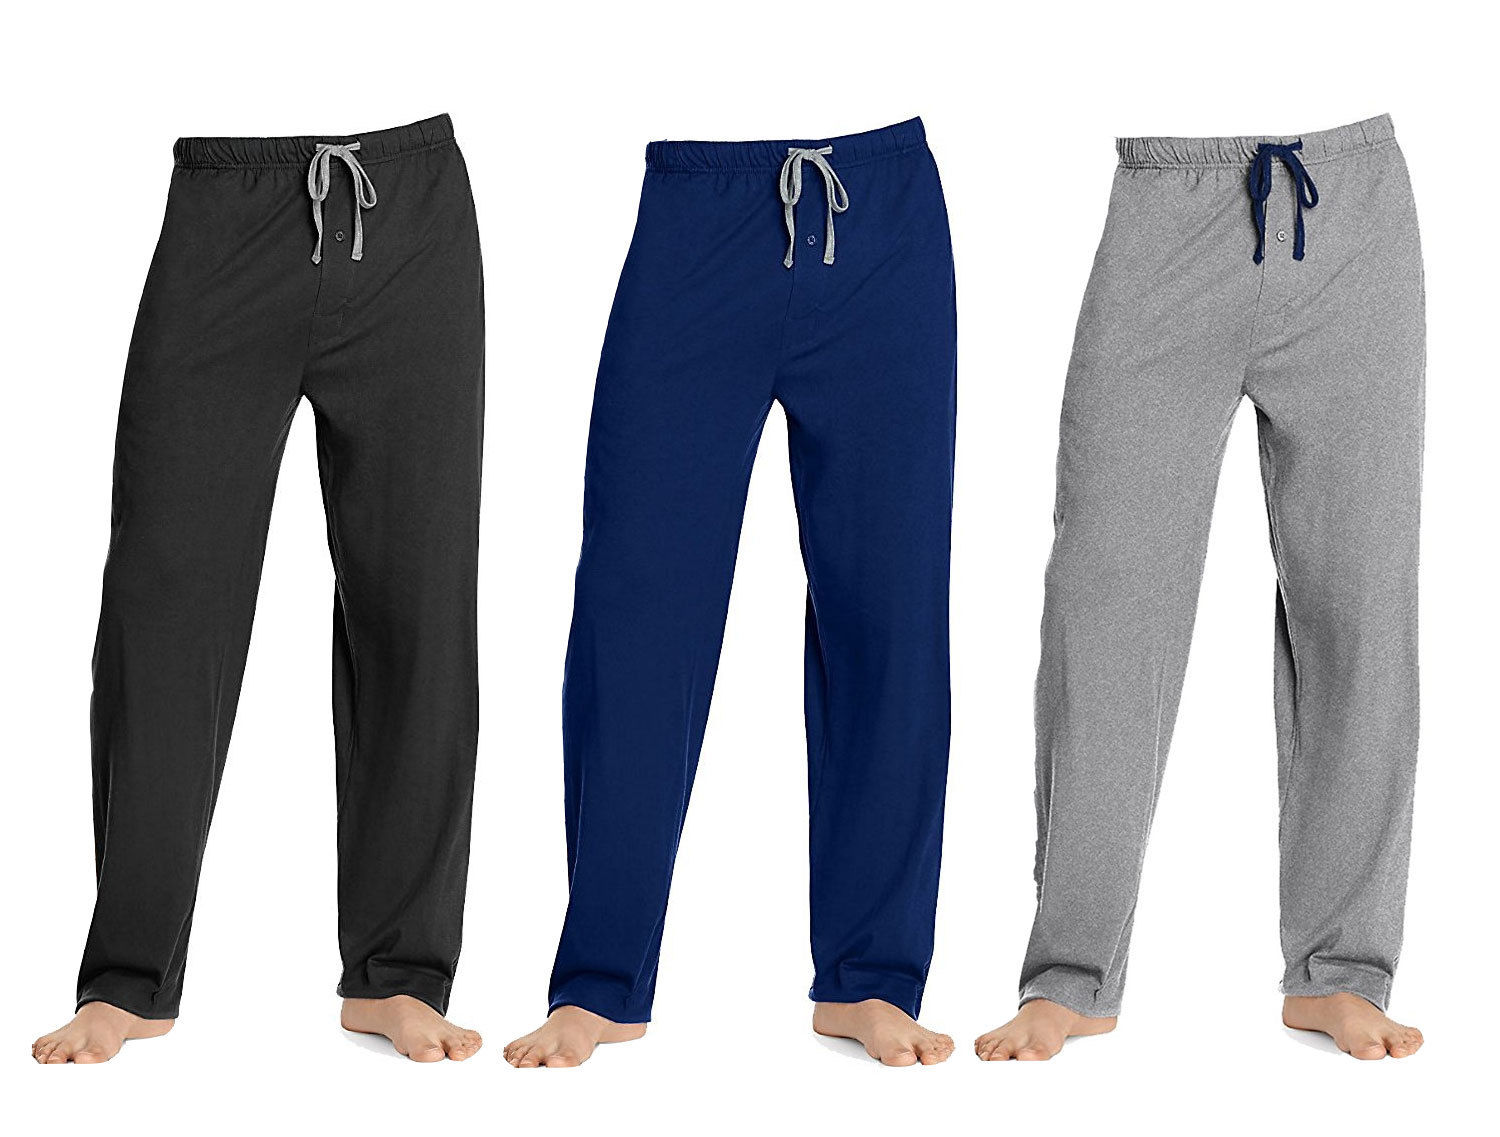 Hanes Men's Solid Knit Sleep Lounge Pant, in 3 Colors and all Sizes up ...